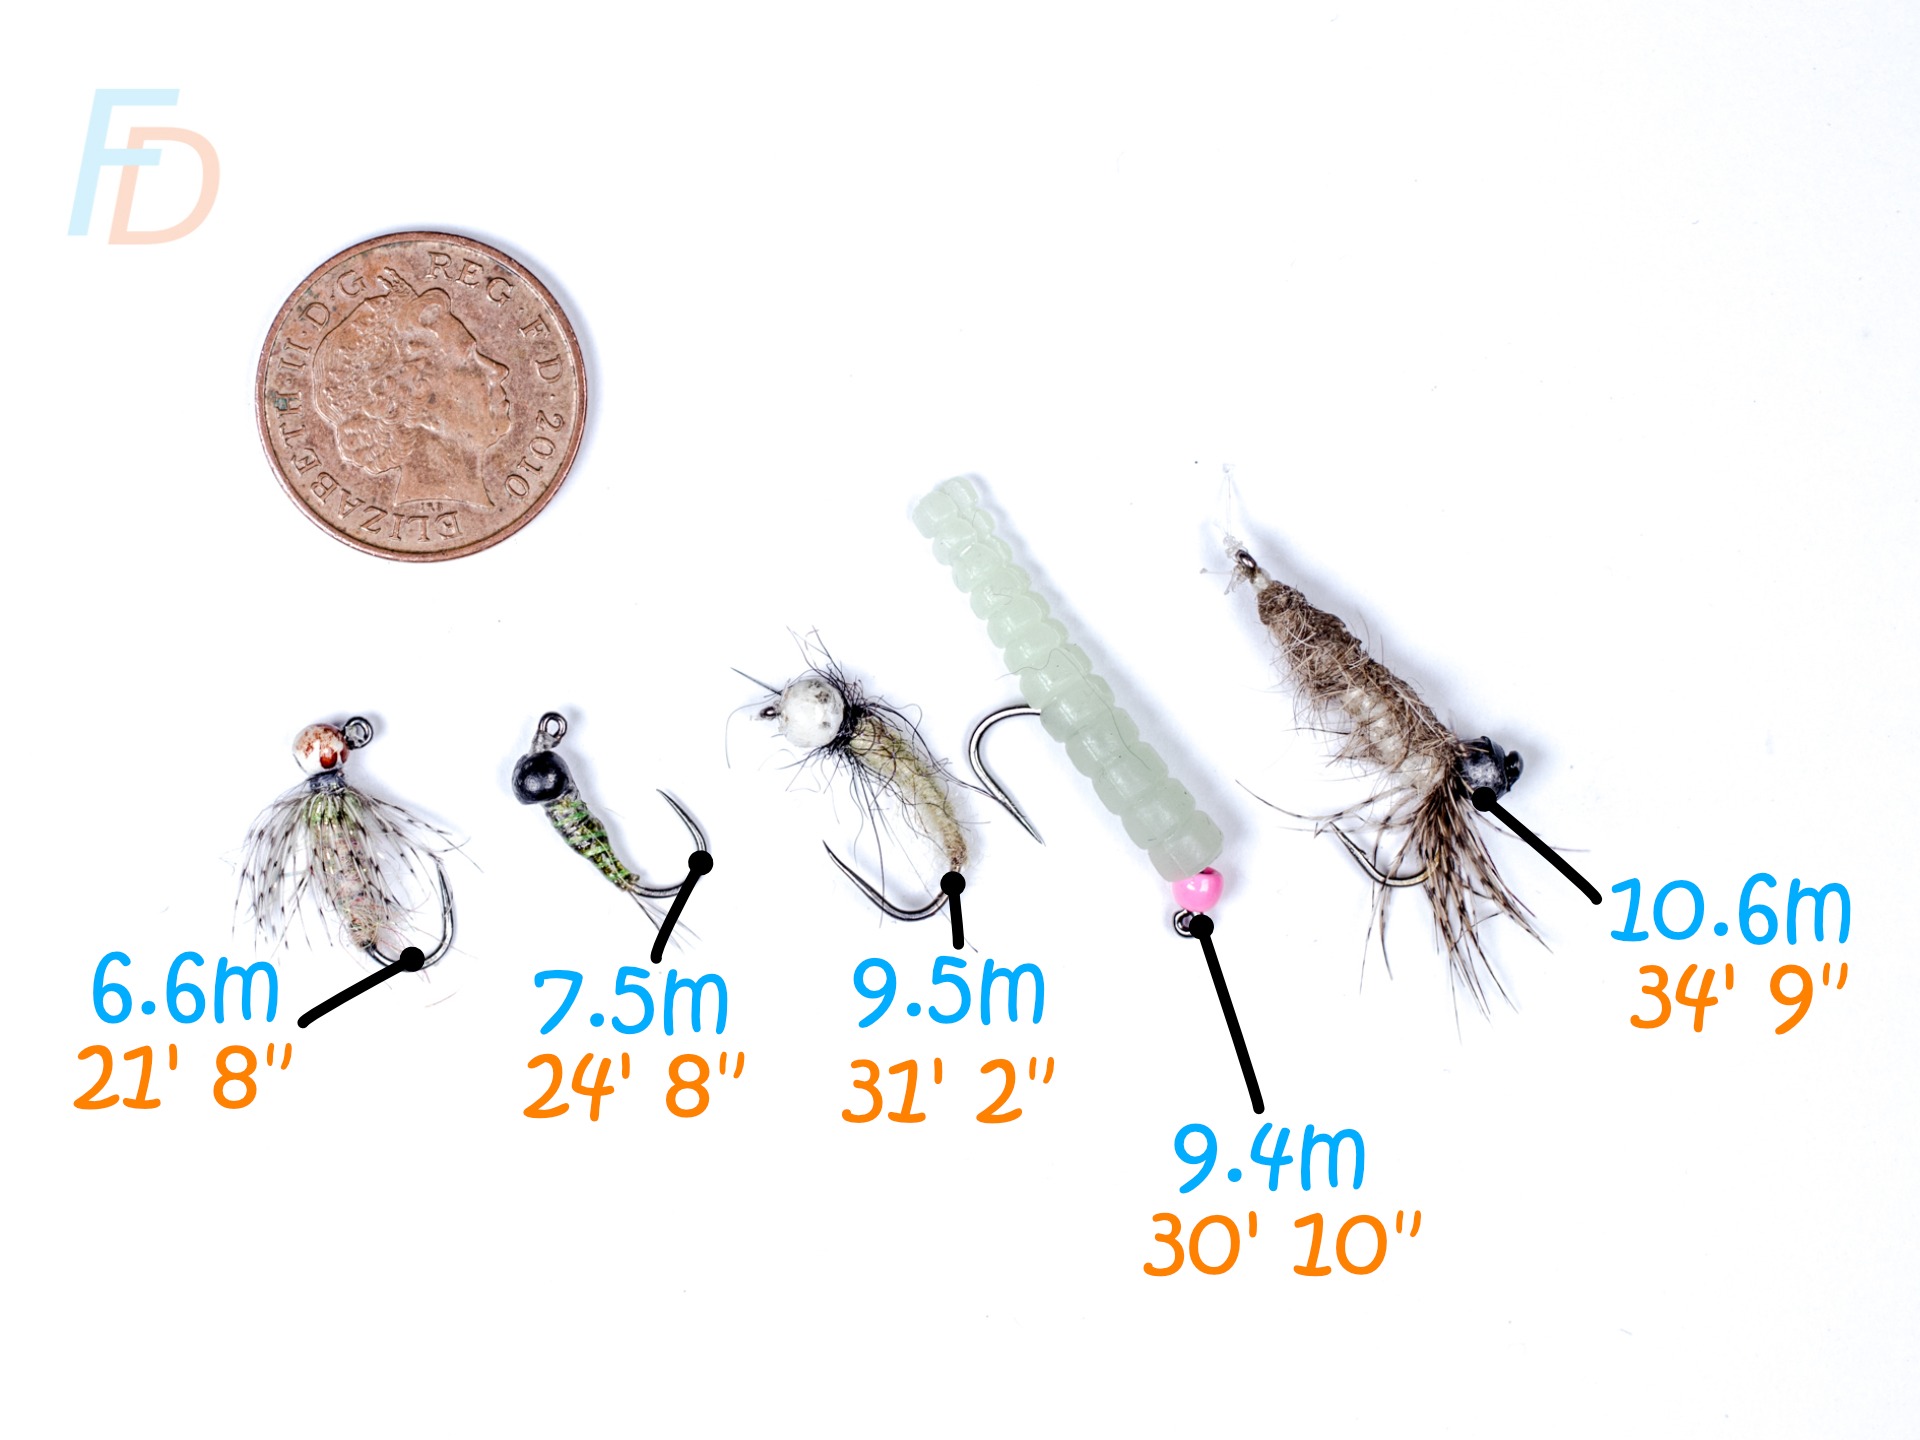 Casting Distances for beadhead nymphs 